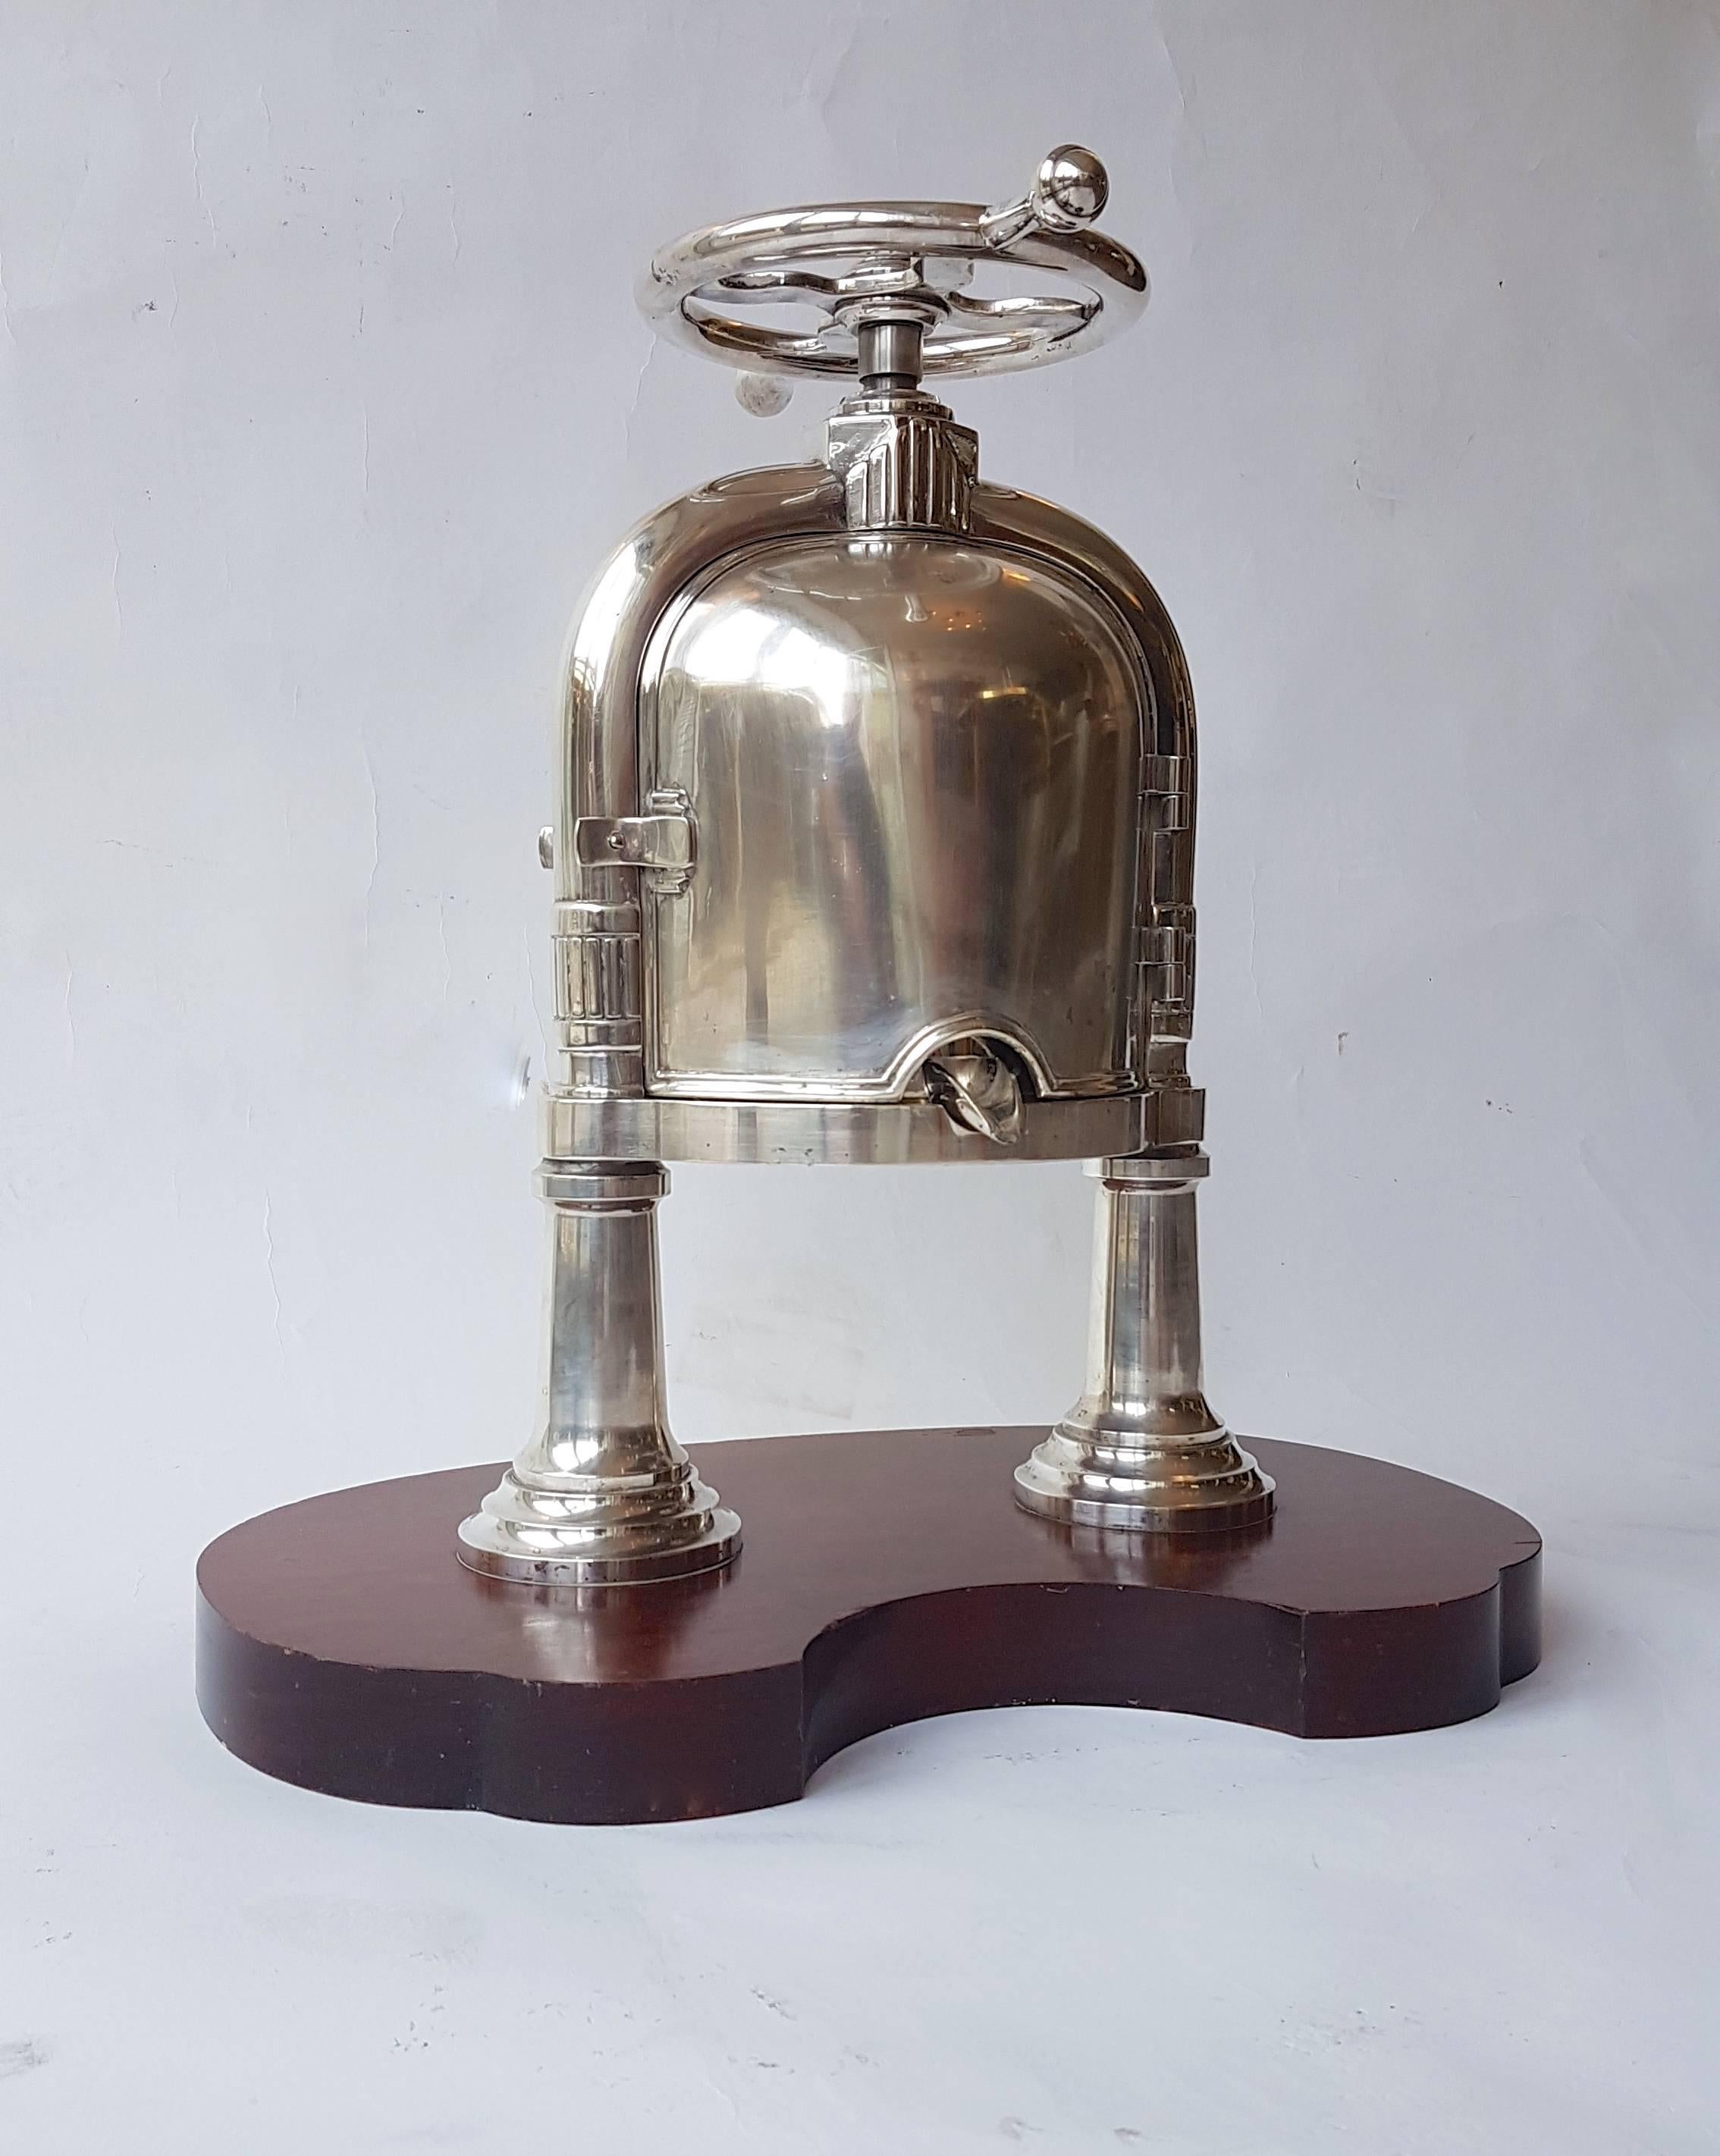 Rare and specially-designed silver platered duck press by Christofle, 1920.

The duck press is used for the 